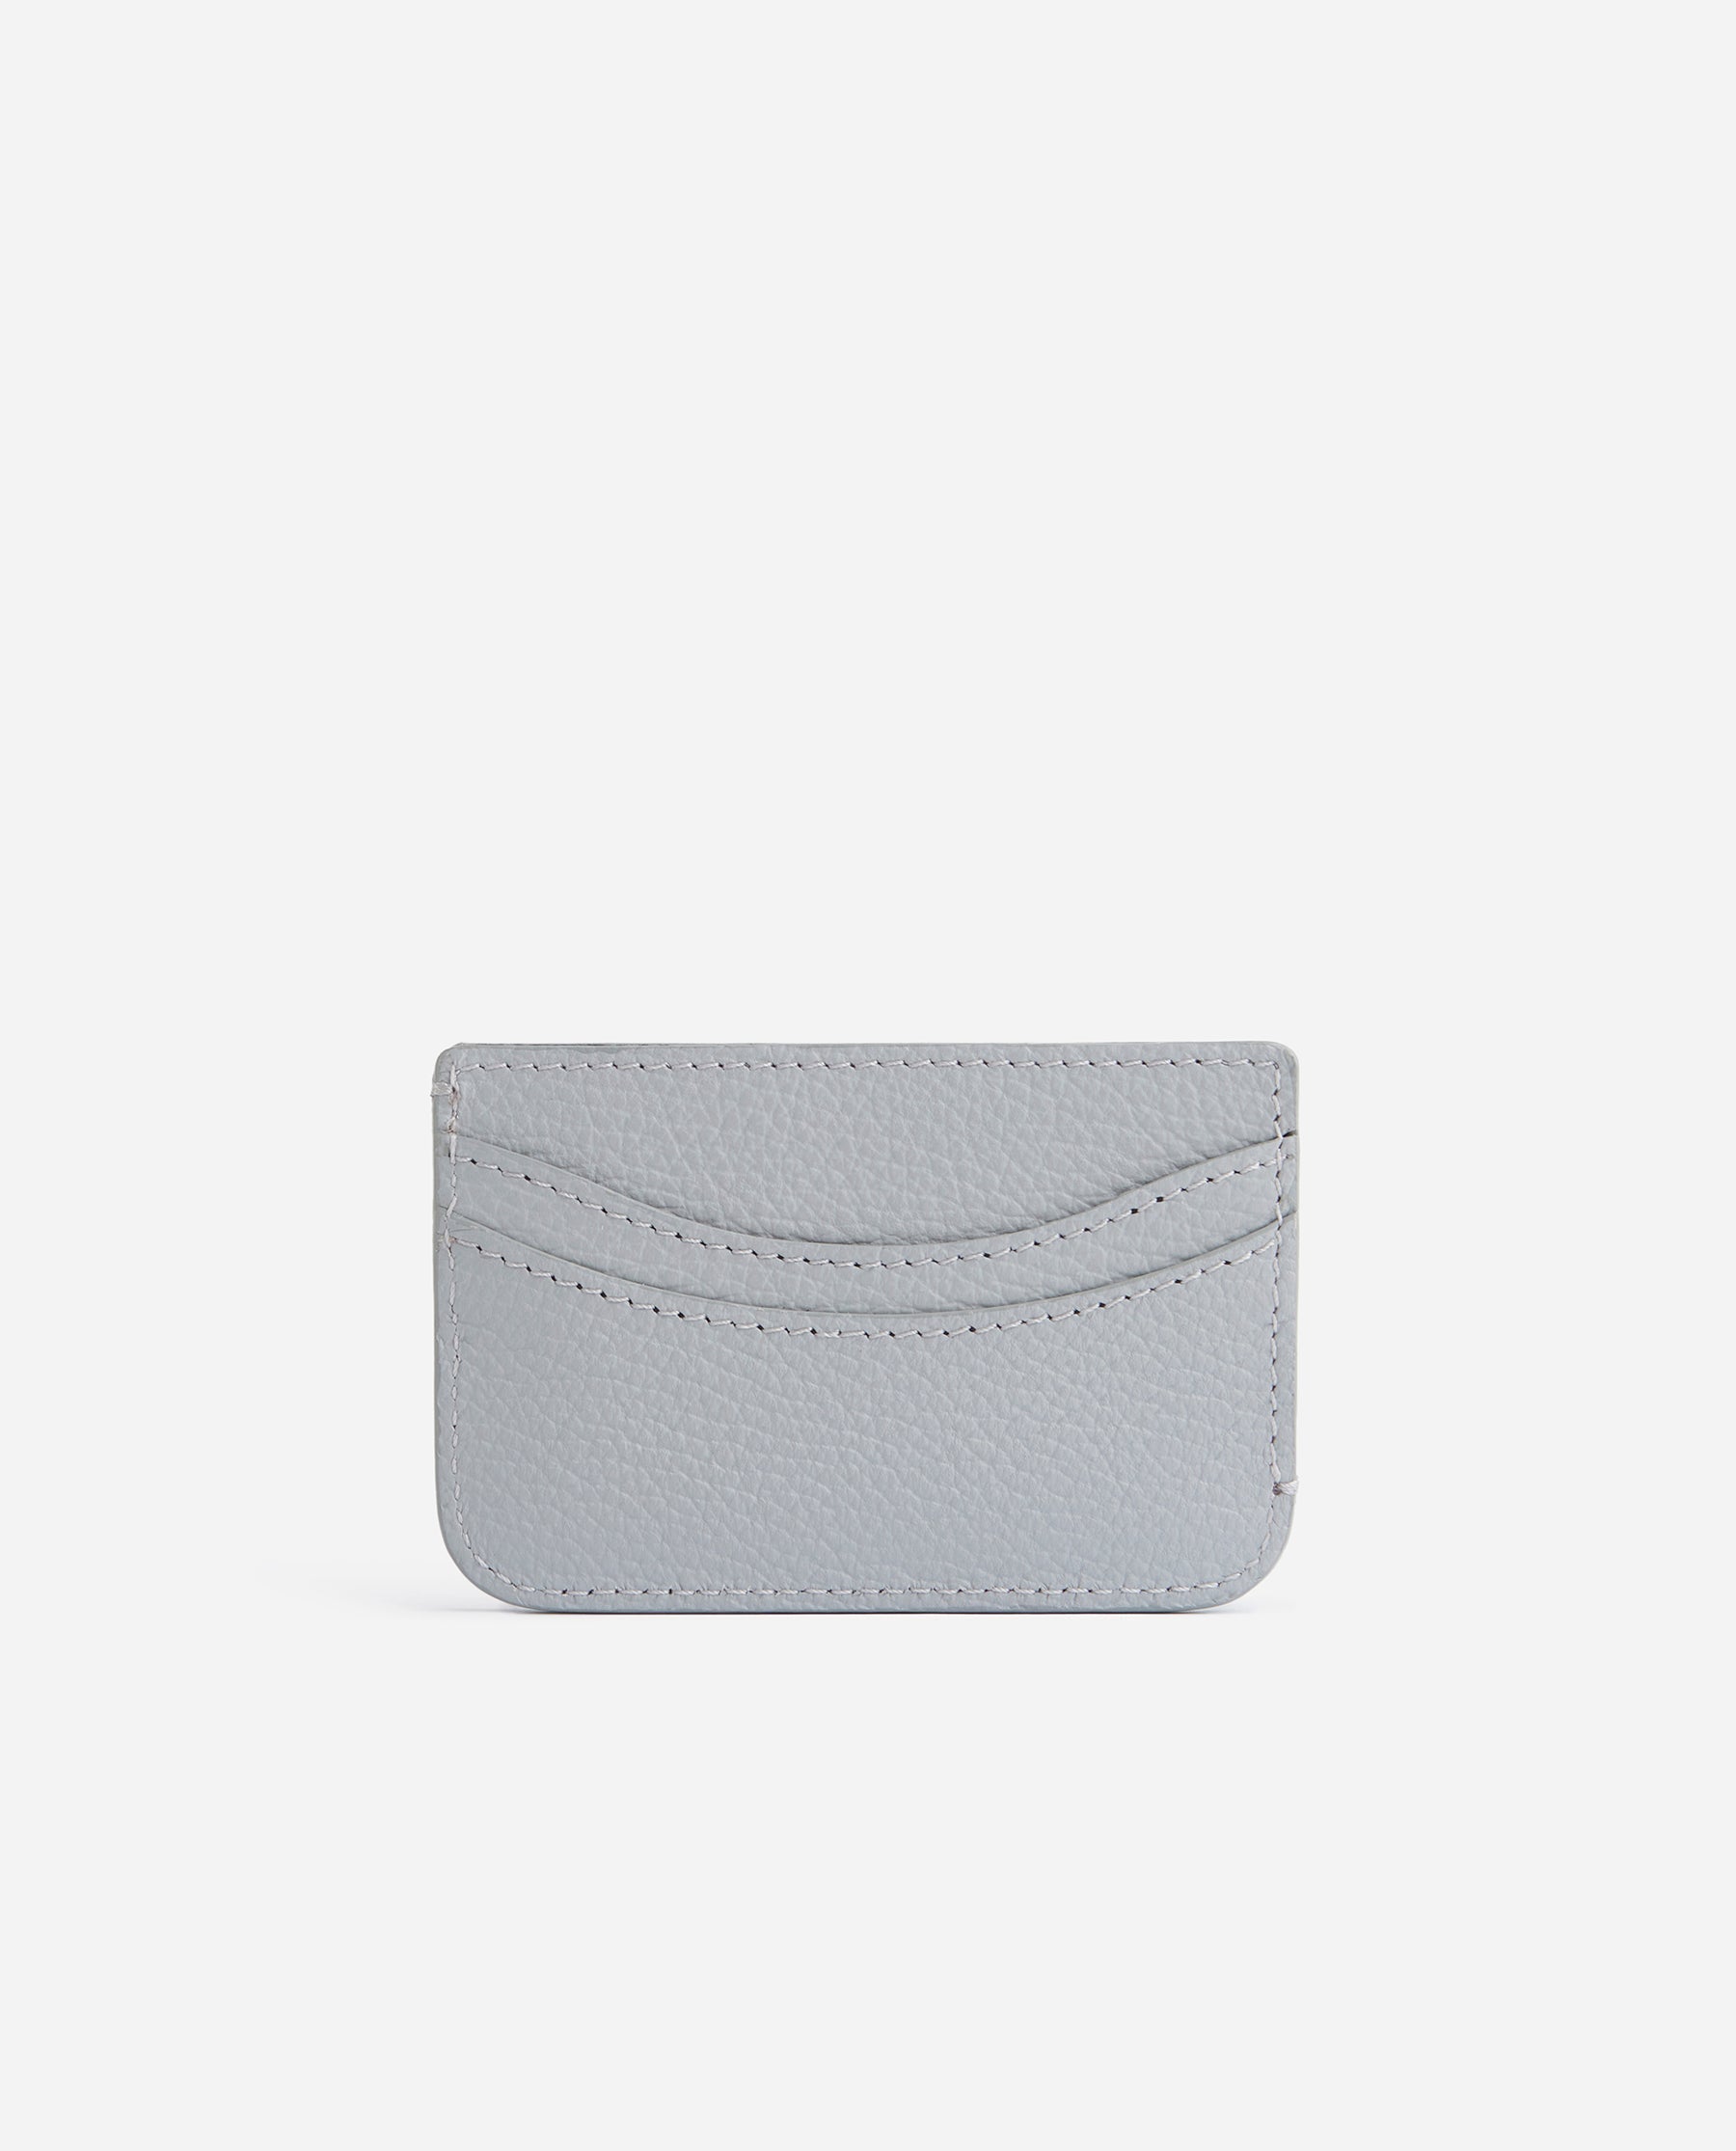 Flattered-OUTLET-SALE-Bonnie-Cardholder-Leather-Grey-Taschen-Onesize-Grey-Leather-ARCHIVE-COLLECTION.jpg